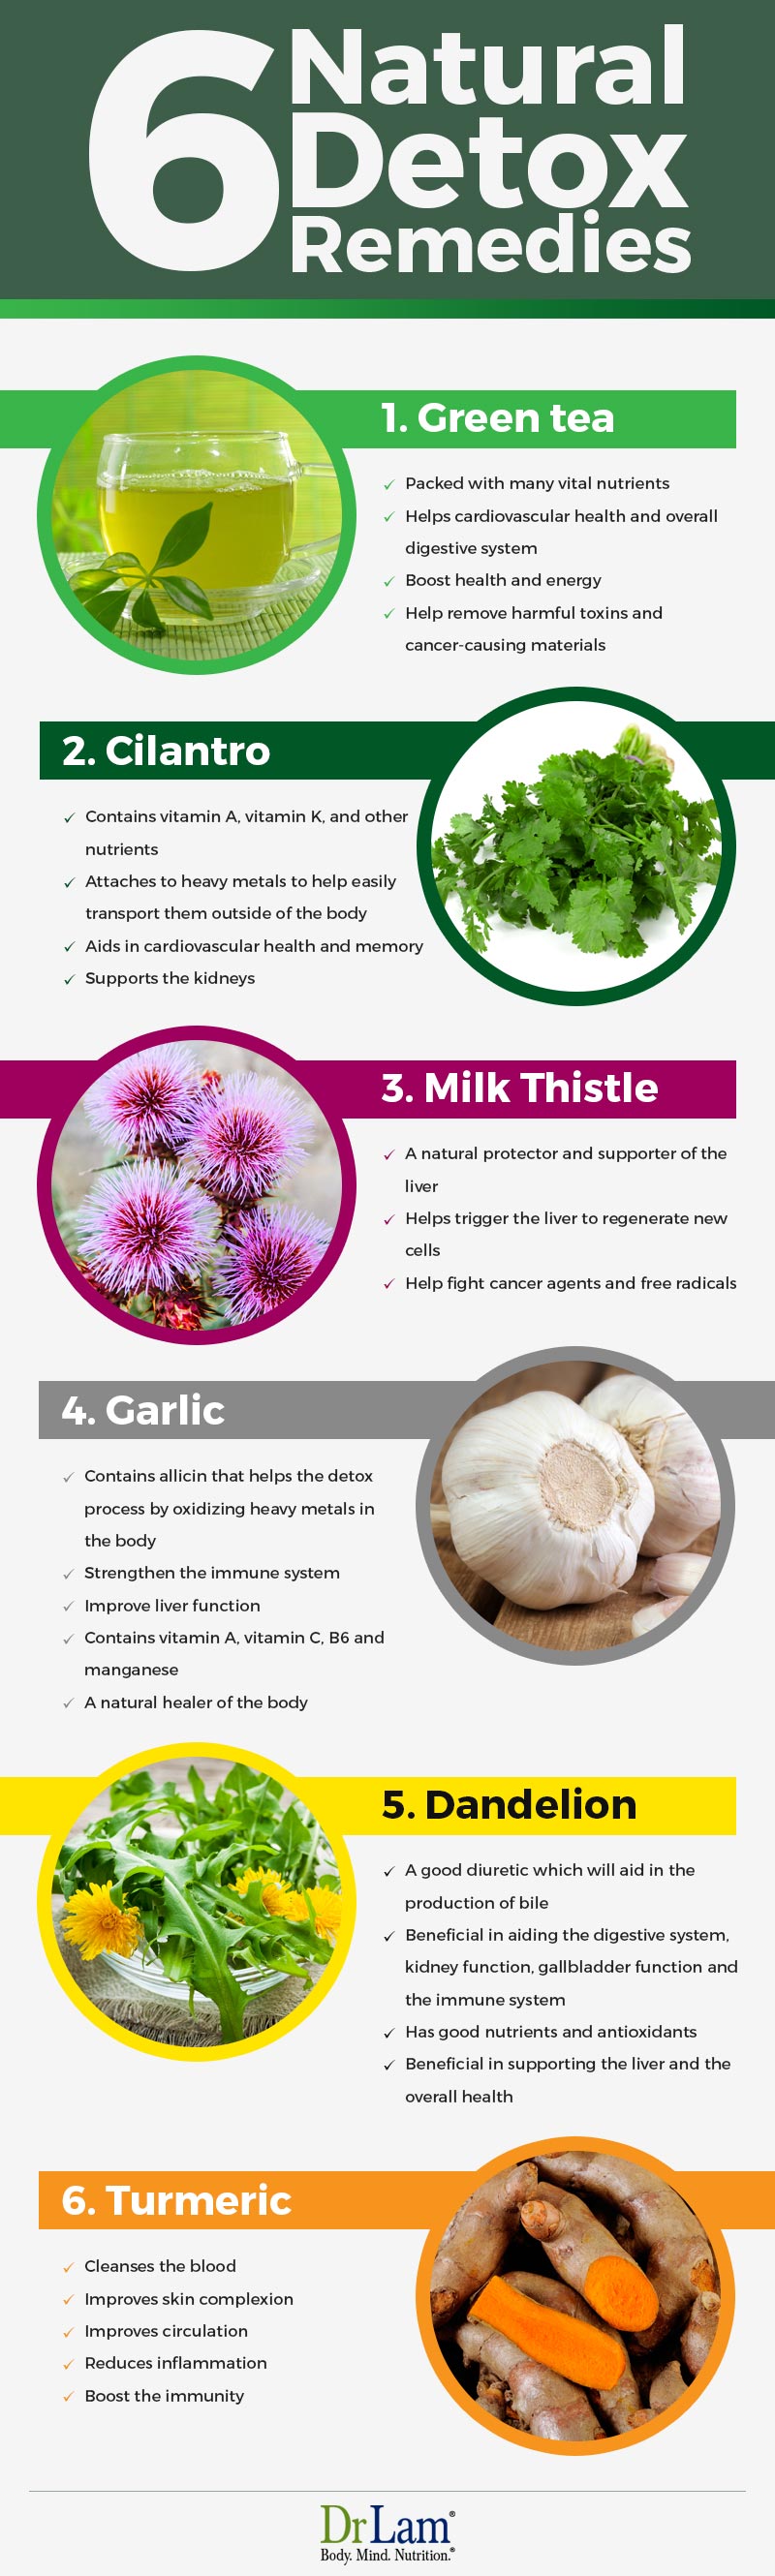 Check out this easy to understand infographic about 6 ingredients to detox your body naturally.